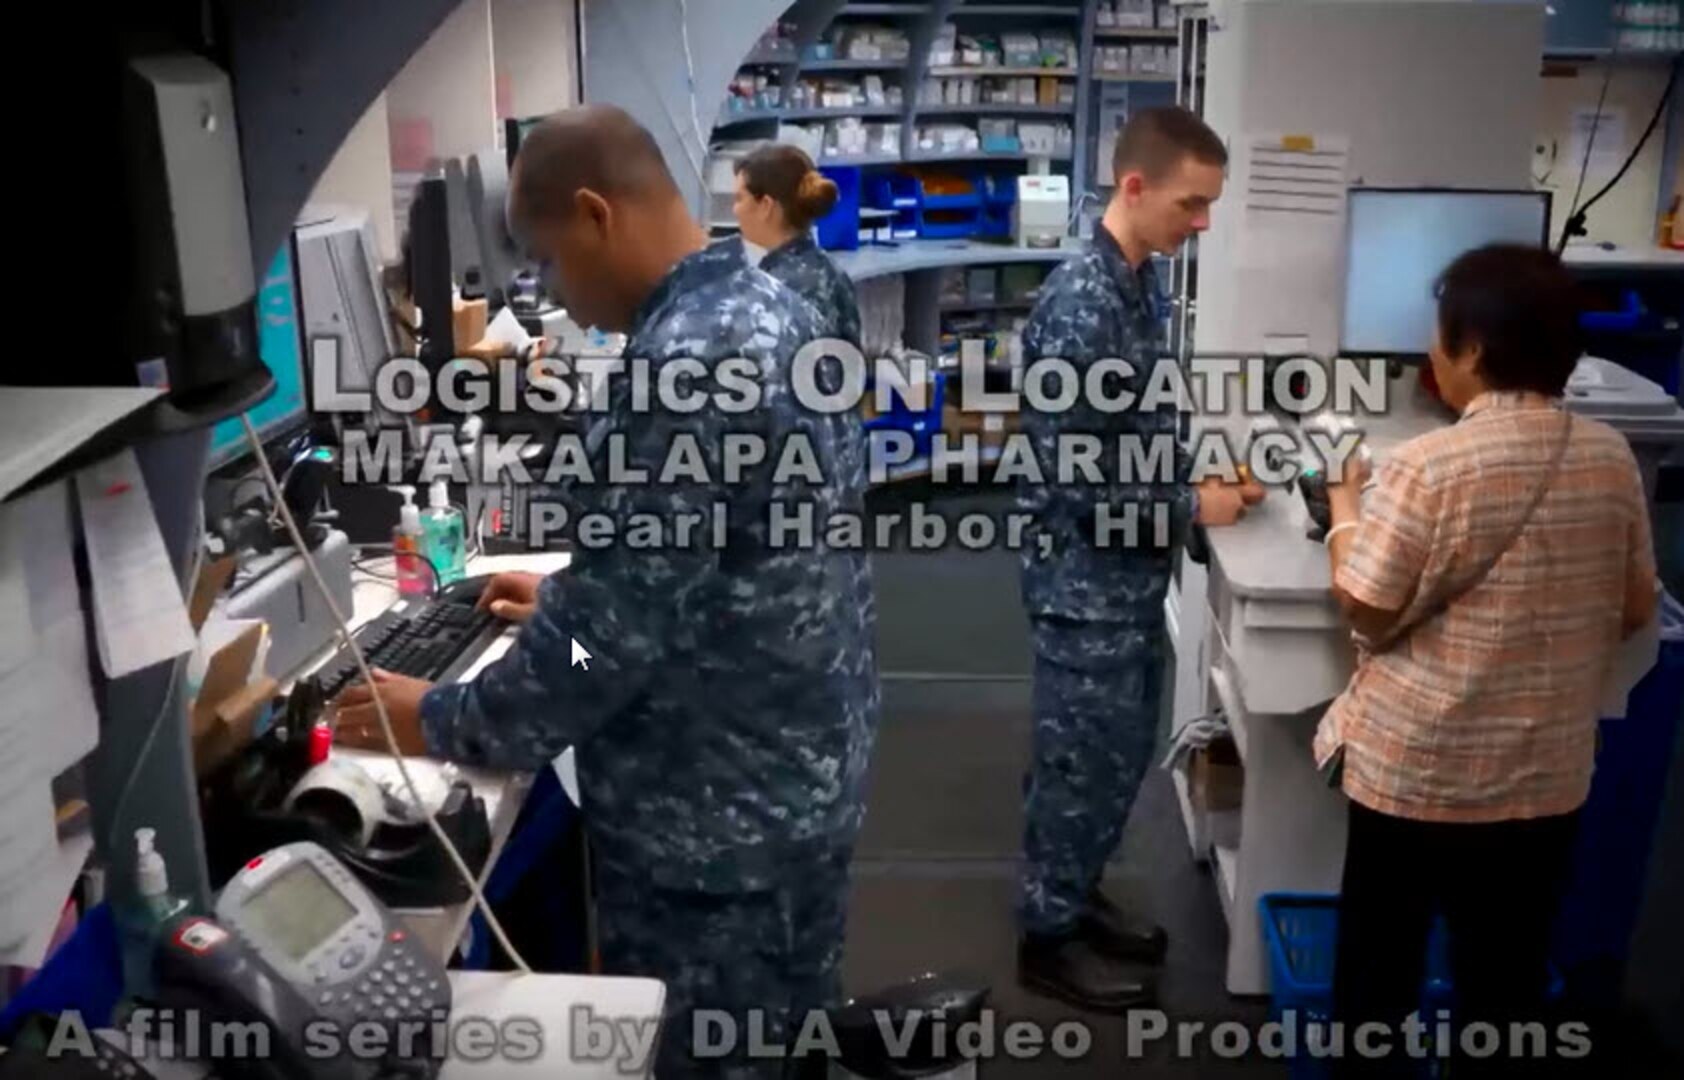 The latest "Logistics on Location" video shows how the Makalapa Pharmacy in Pearl Harbor, Hawaii, works with DLA Troop Support Pacific and the Medical supply chain’s pharmaceutical prime vendor program to help keep service members and their families healthy.